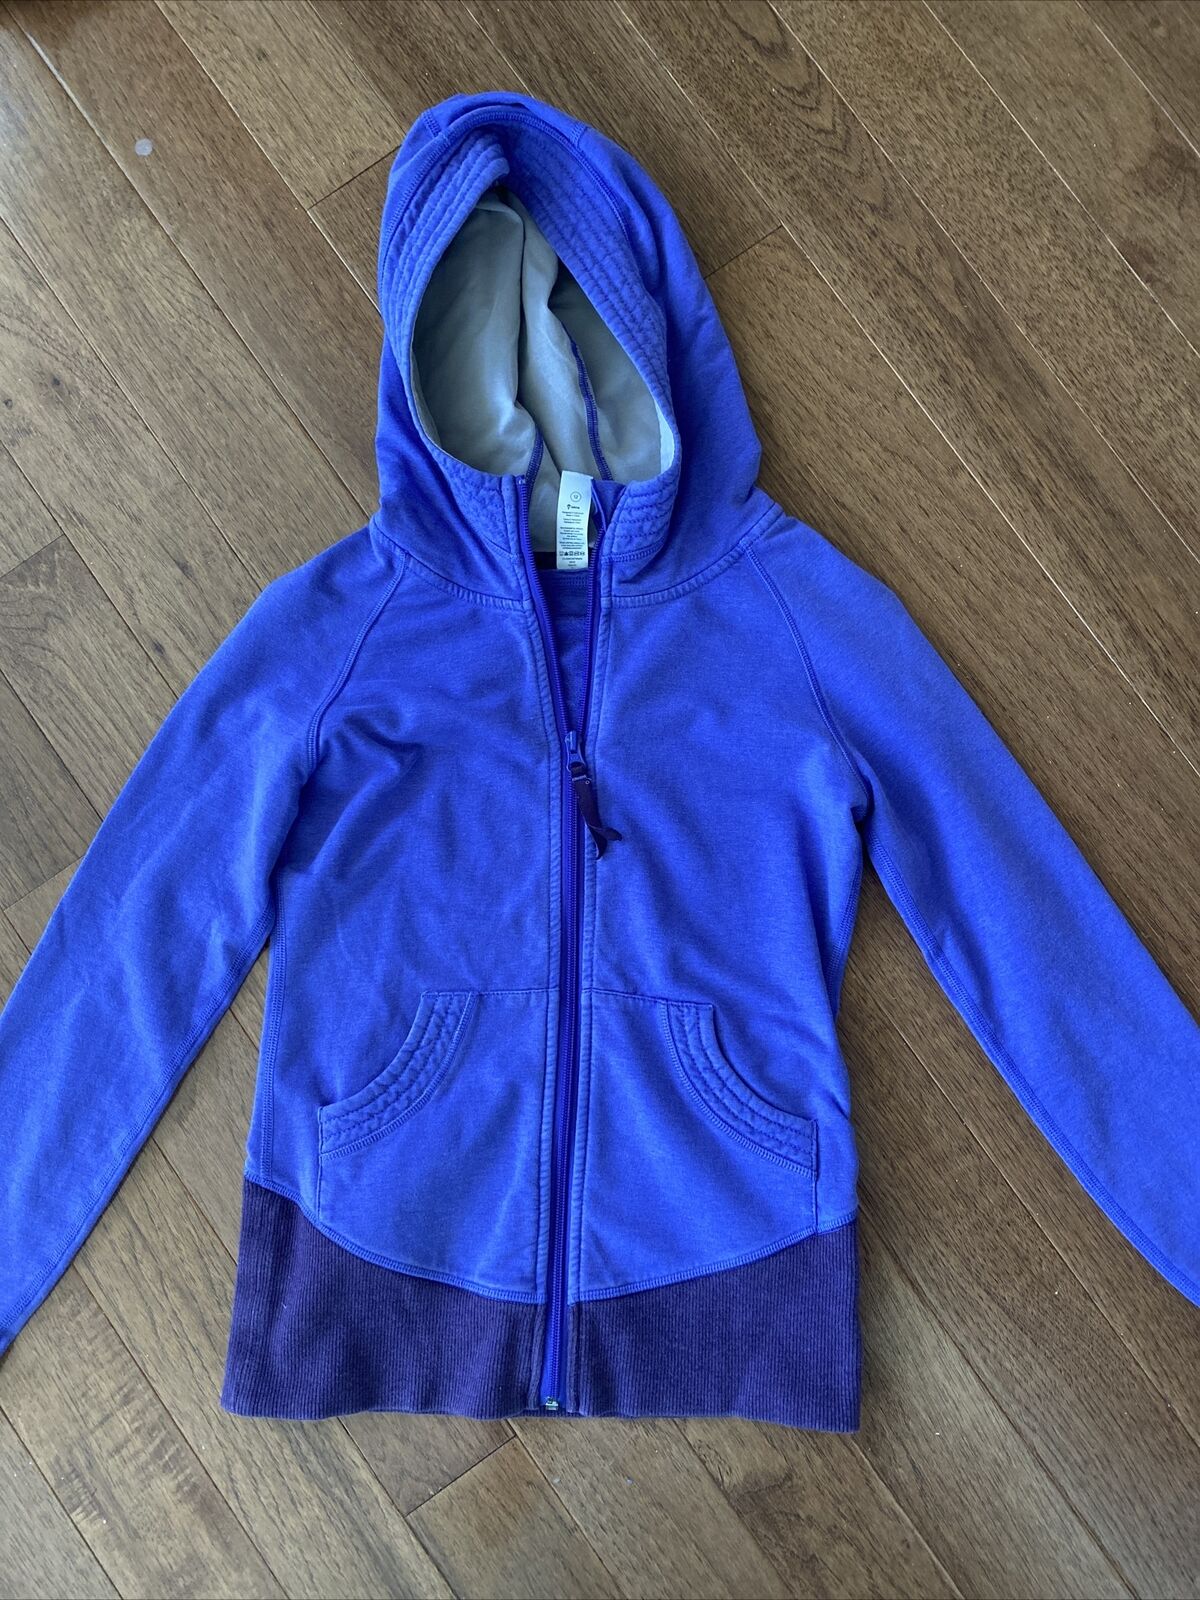 Ivivva By Lululemon Girls Full Zip Hooded Eeuc Athletic Top Jacket Size 12